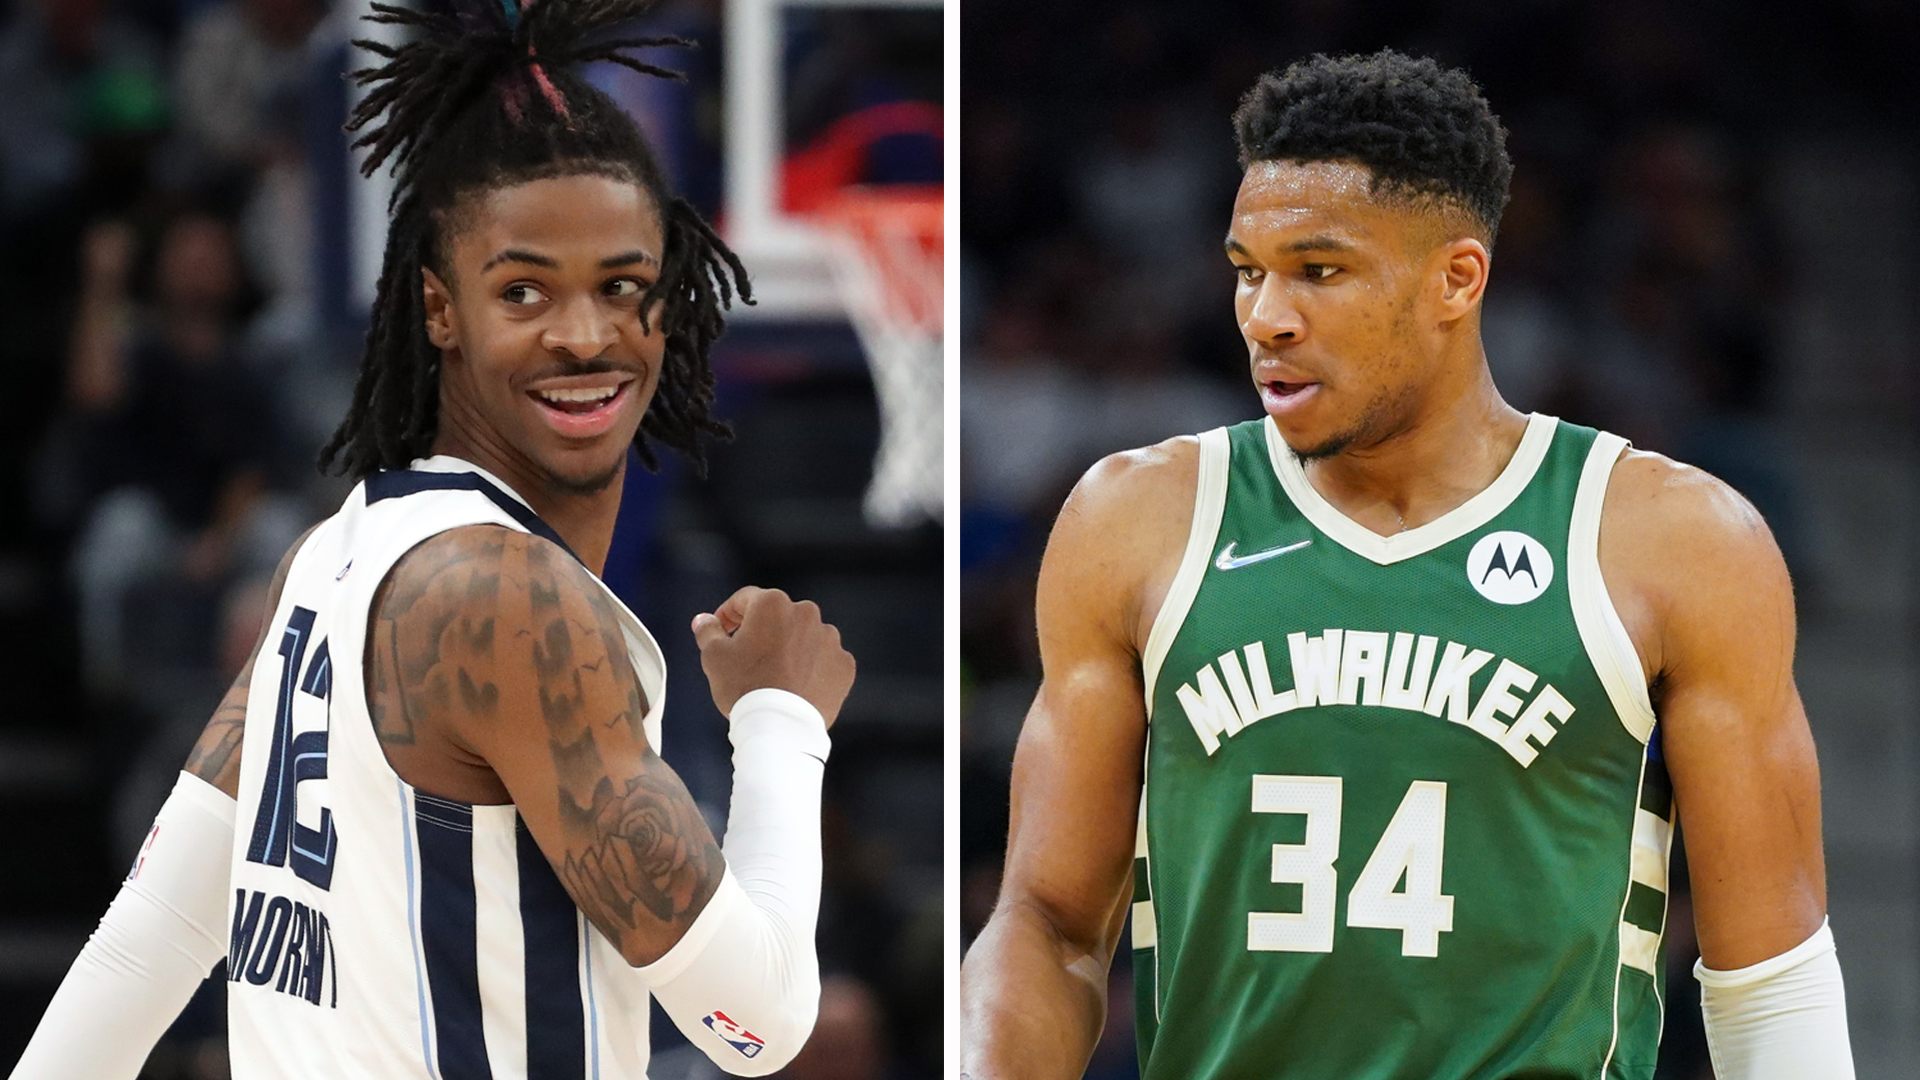 How Ja Morant, Giannis Antetokounmpo Will Give Wizards Important Test